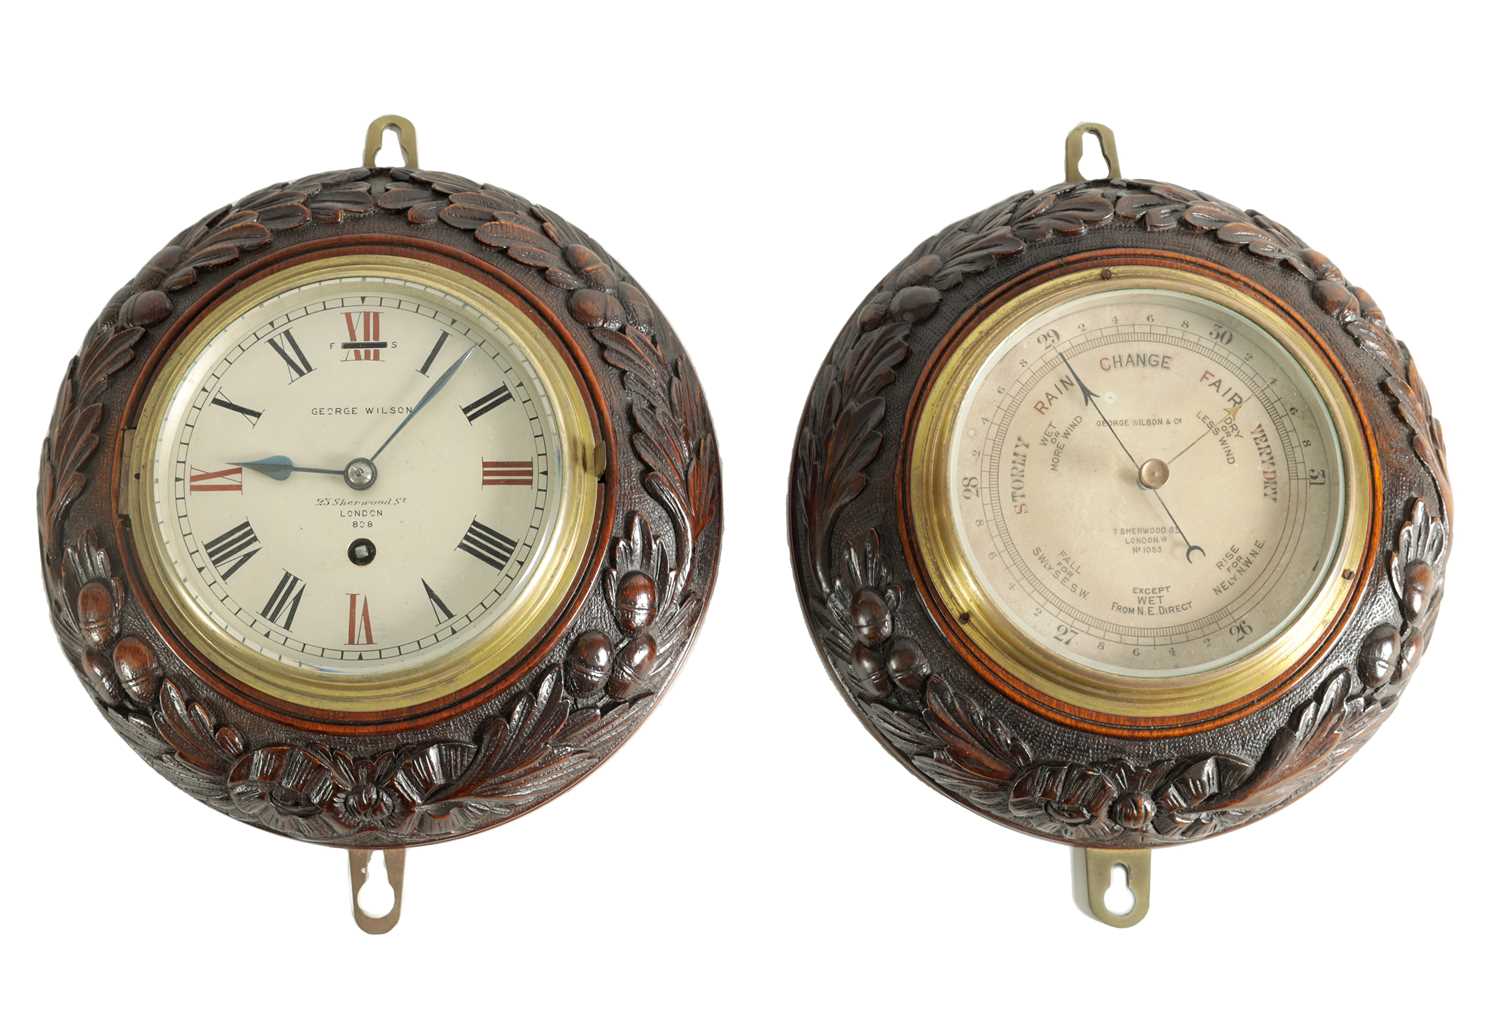 A PAIR OF LATE 19TH CENTURY WALL CLOCK AND BAROMETER SET